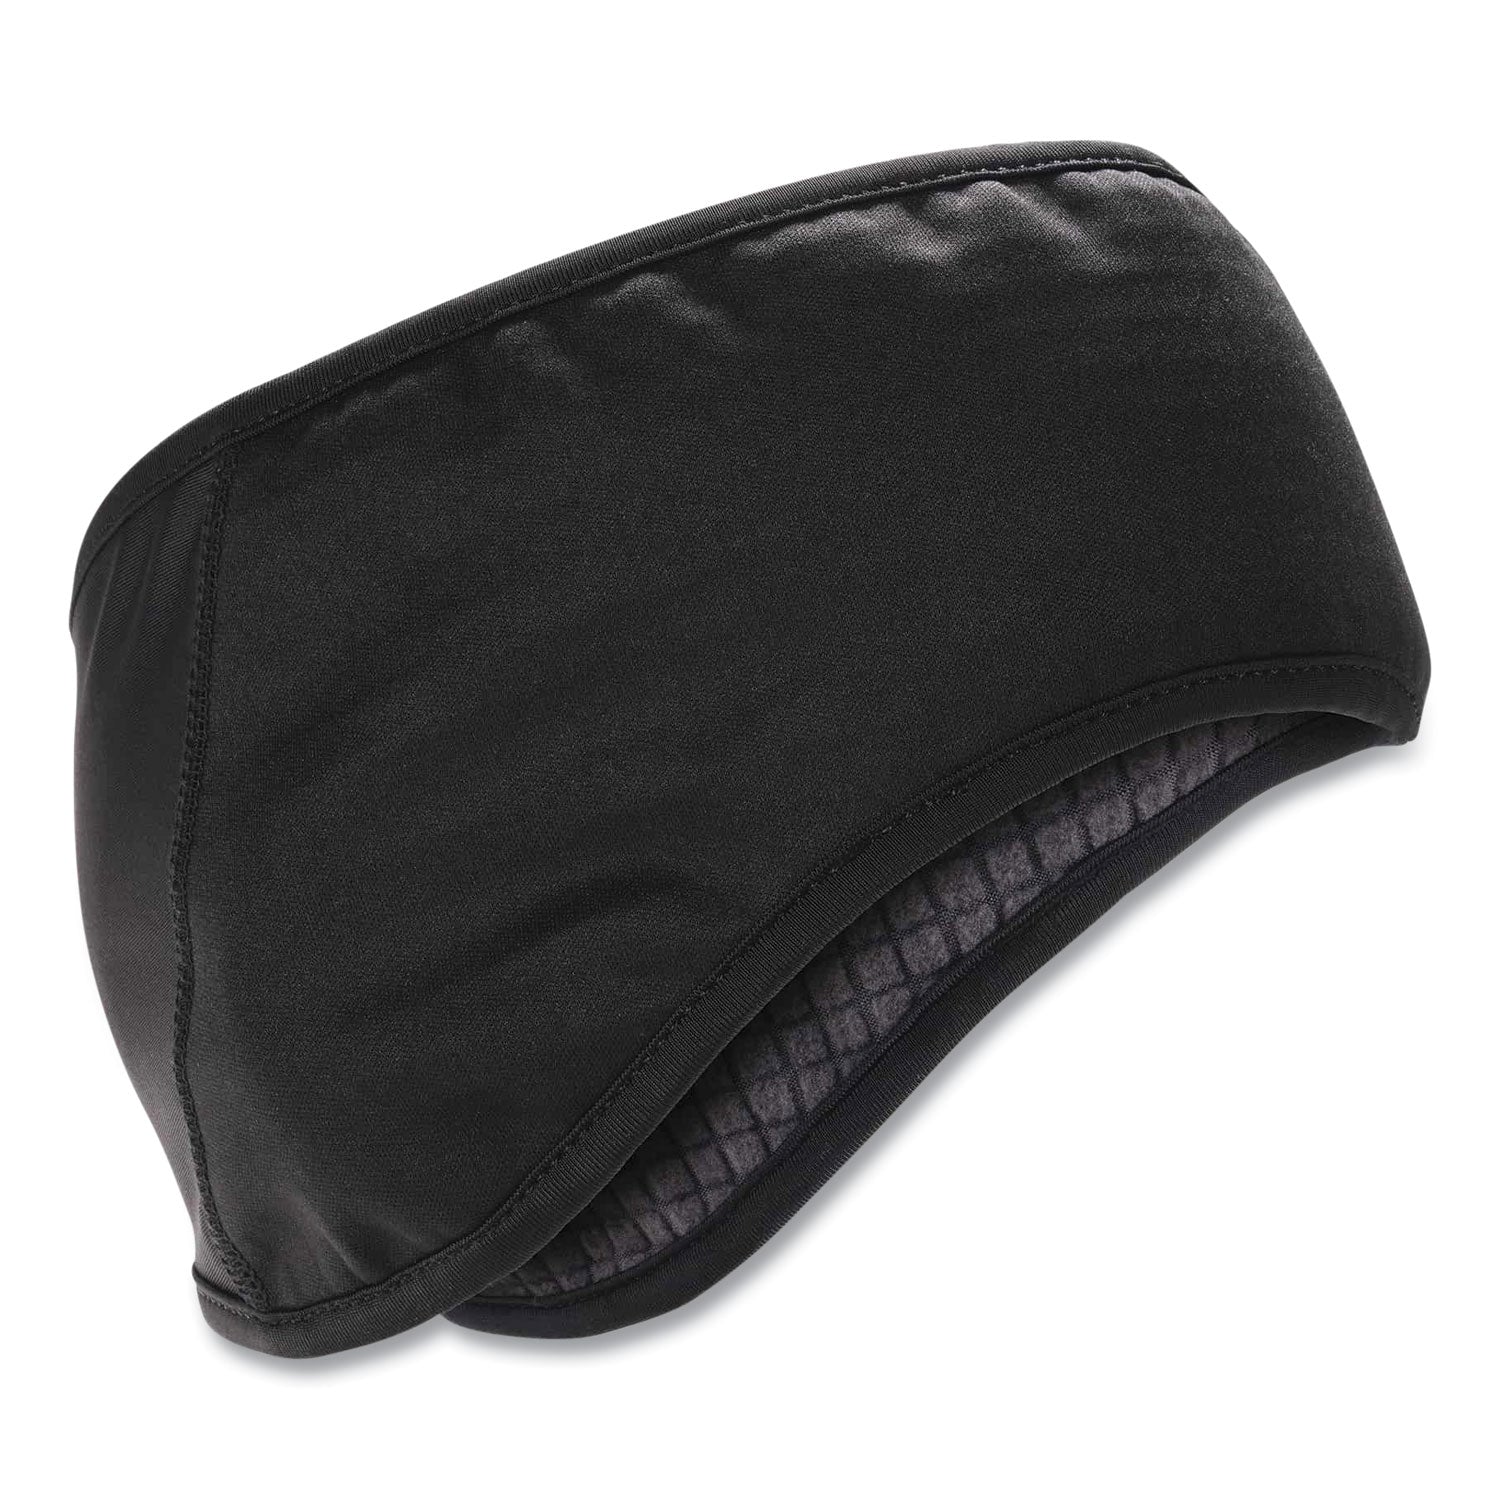 n-ferno-6887-2-layer-winter-headband-spandex-fleece-one-size-fits-most-black-ships-in-1-3-business-days_ego16887 - 1